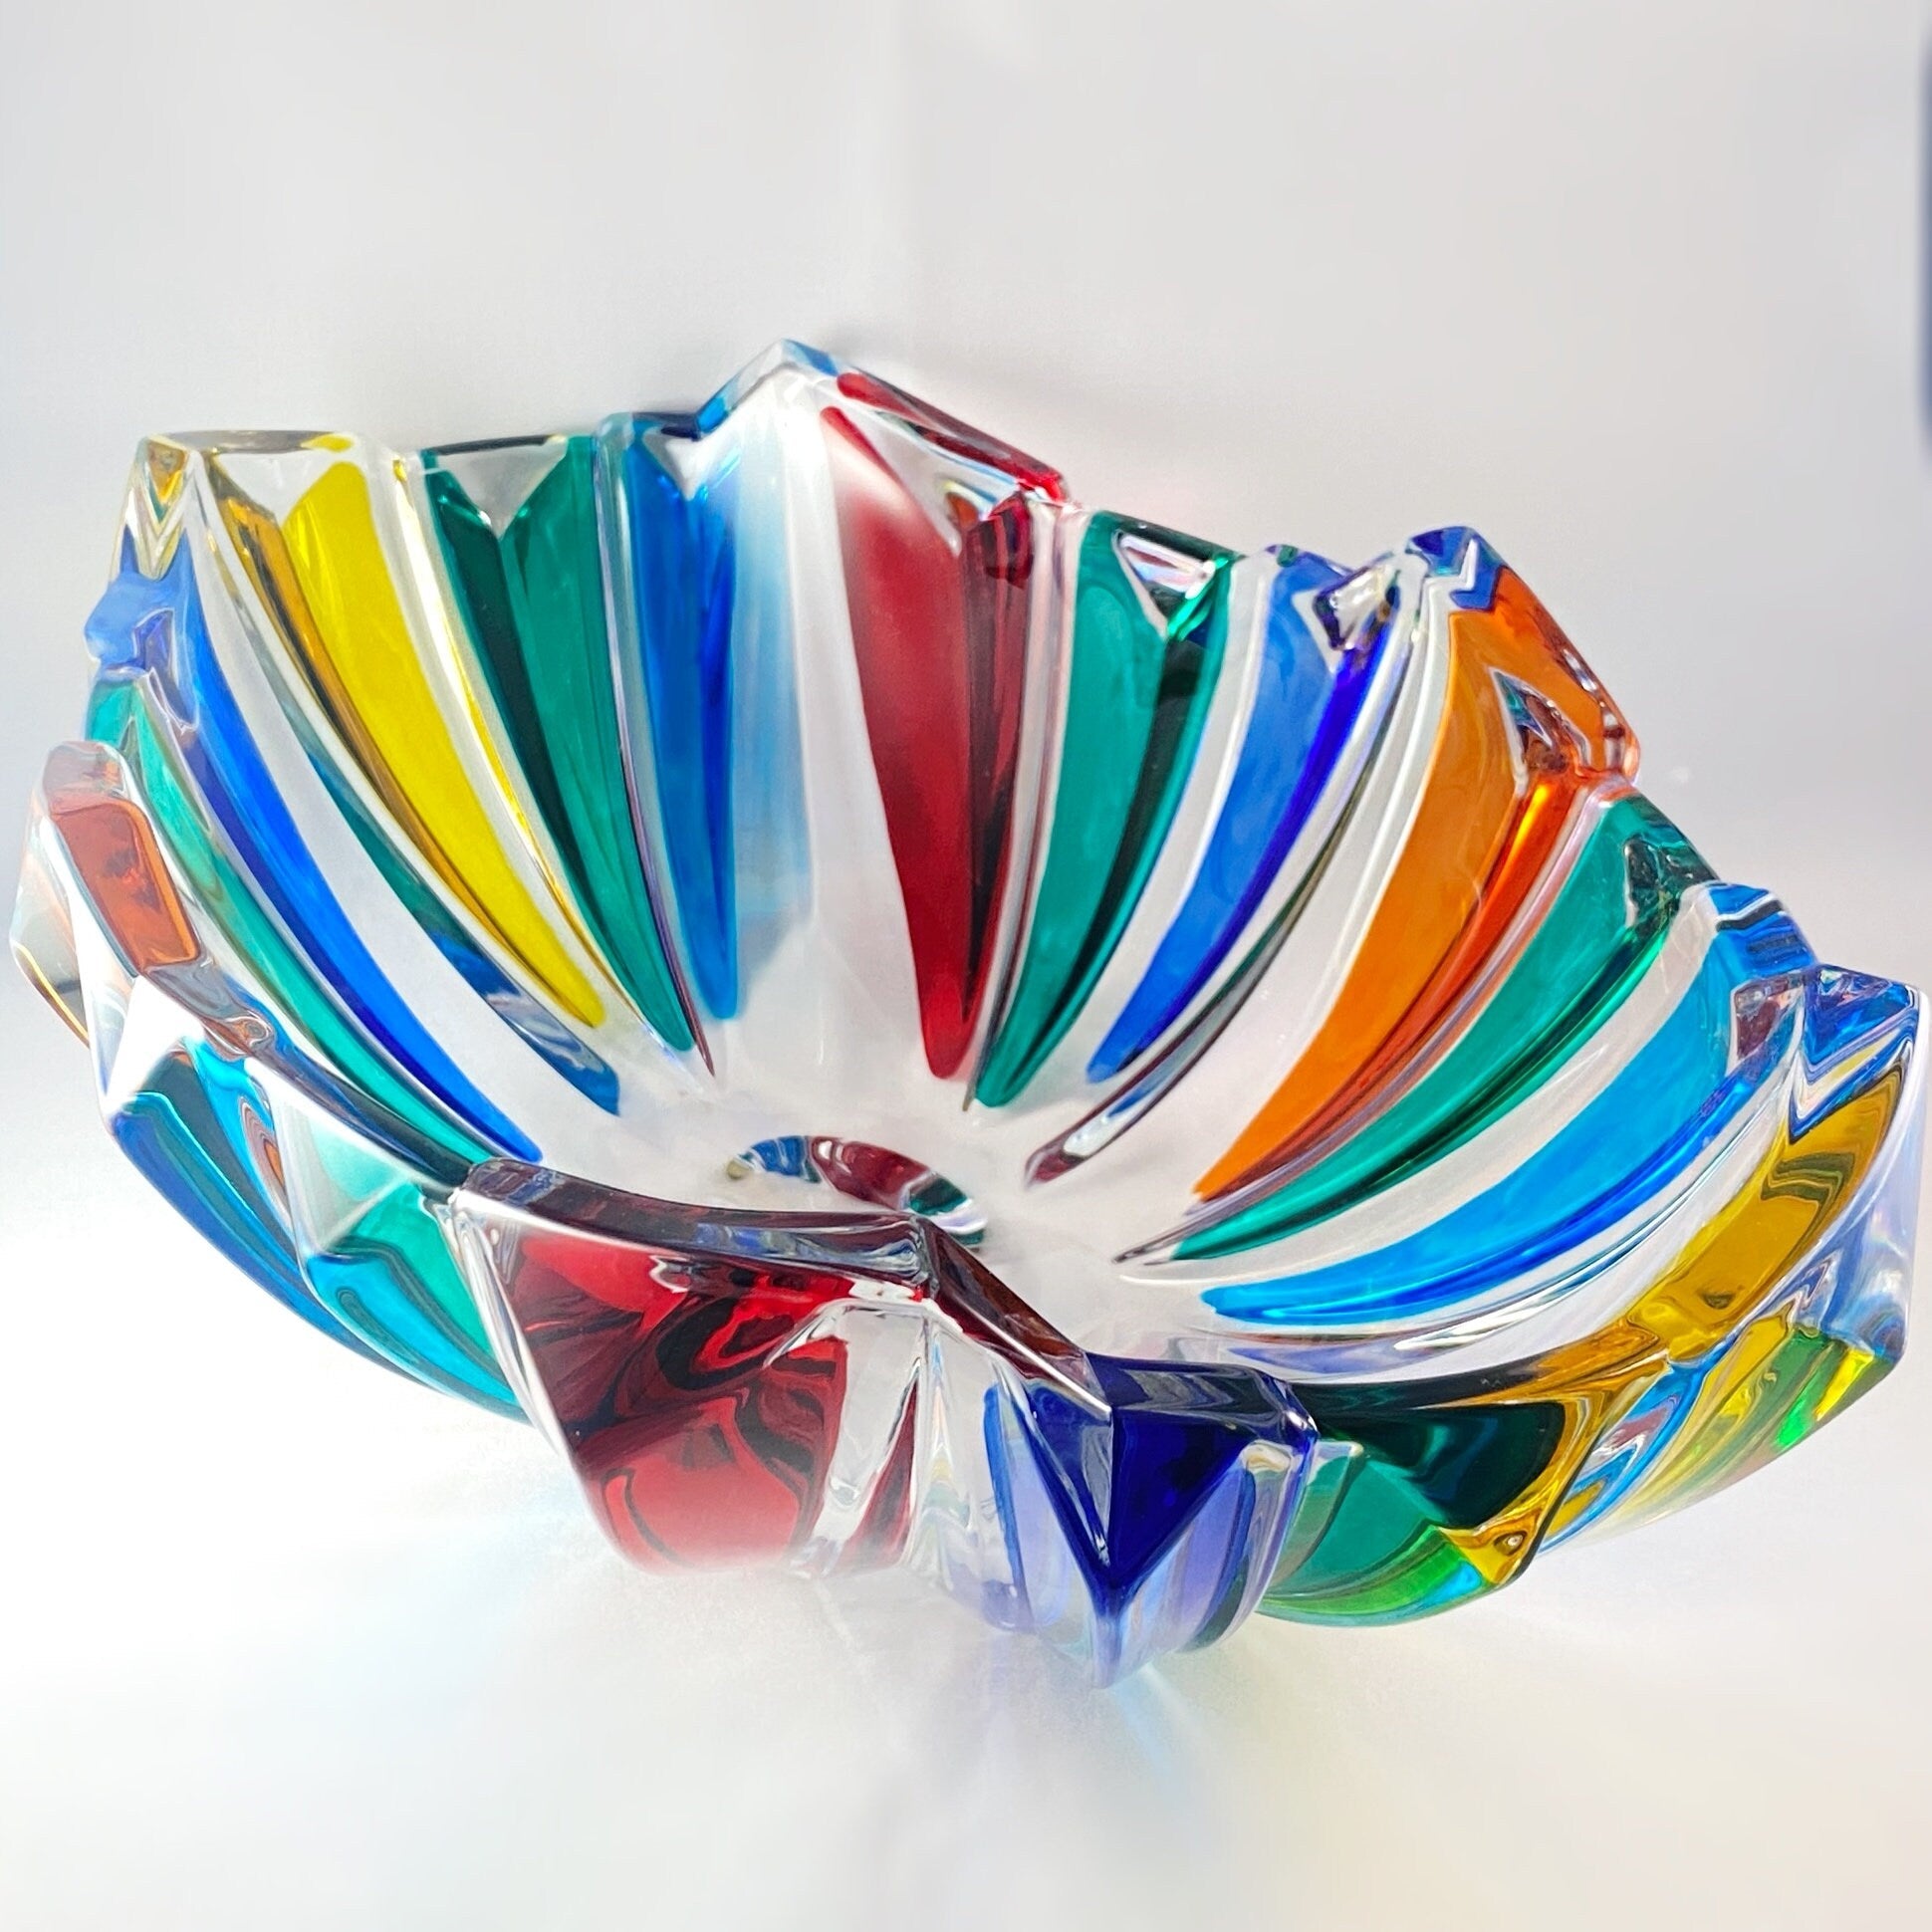 Large Venetian Glass Oval Centerpiece Bowl - Handmade in Italy, Colorful Murano Glass Statement Bowl